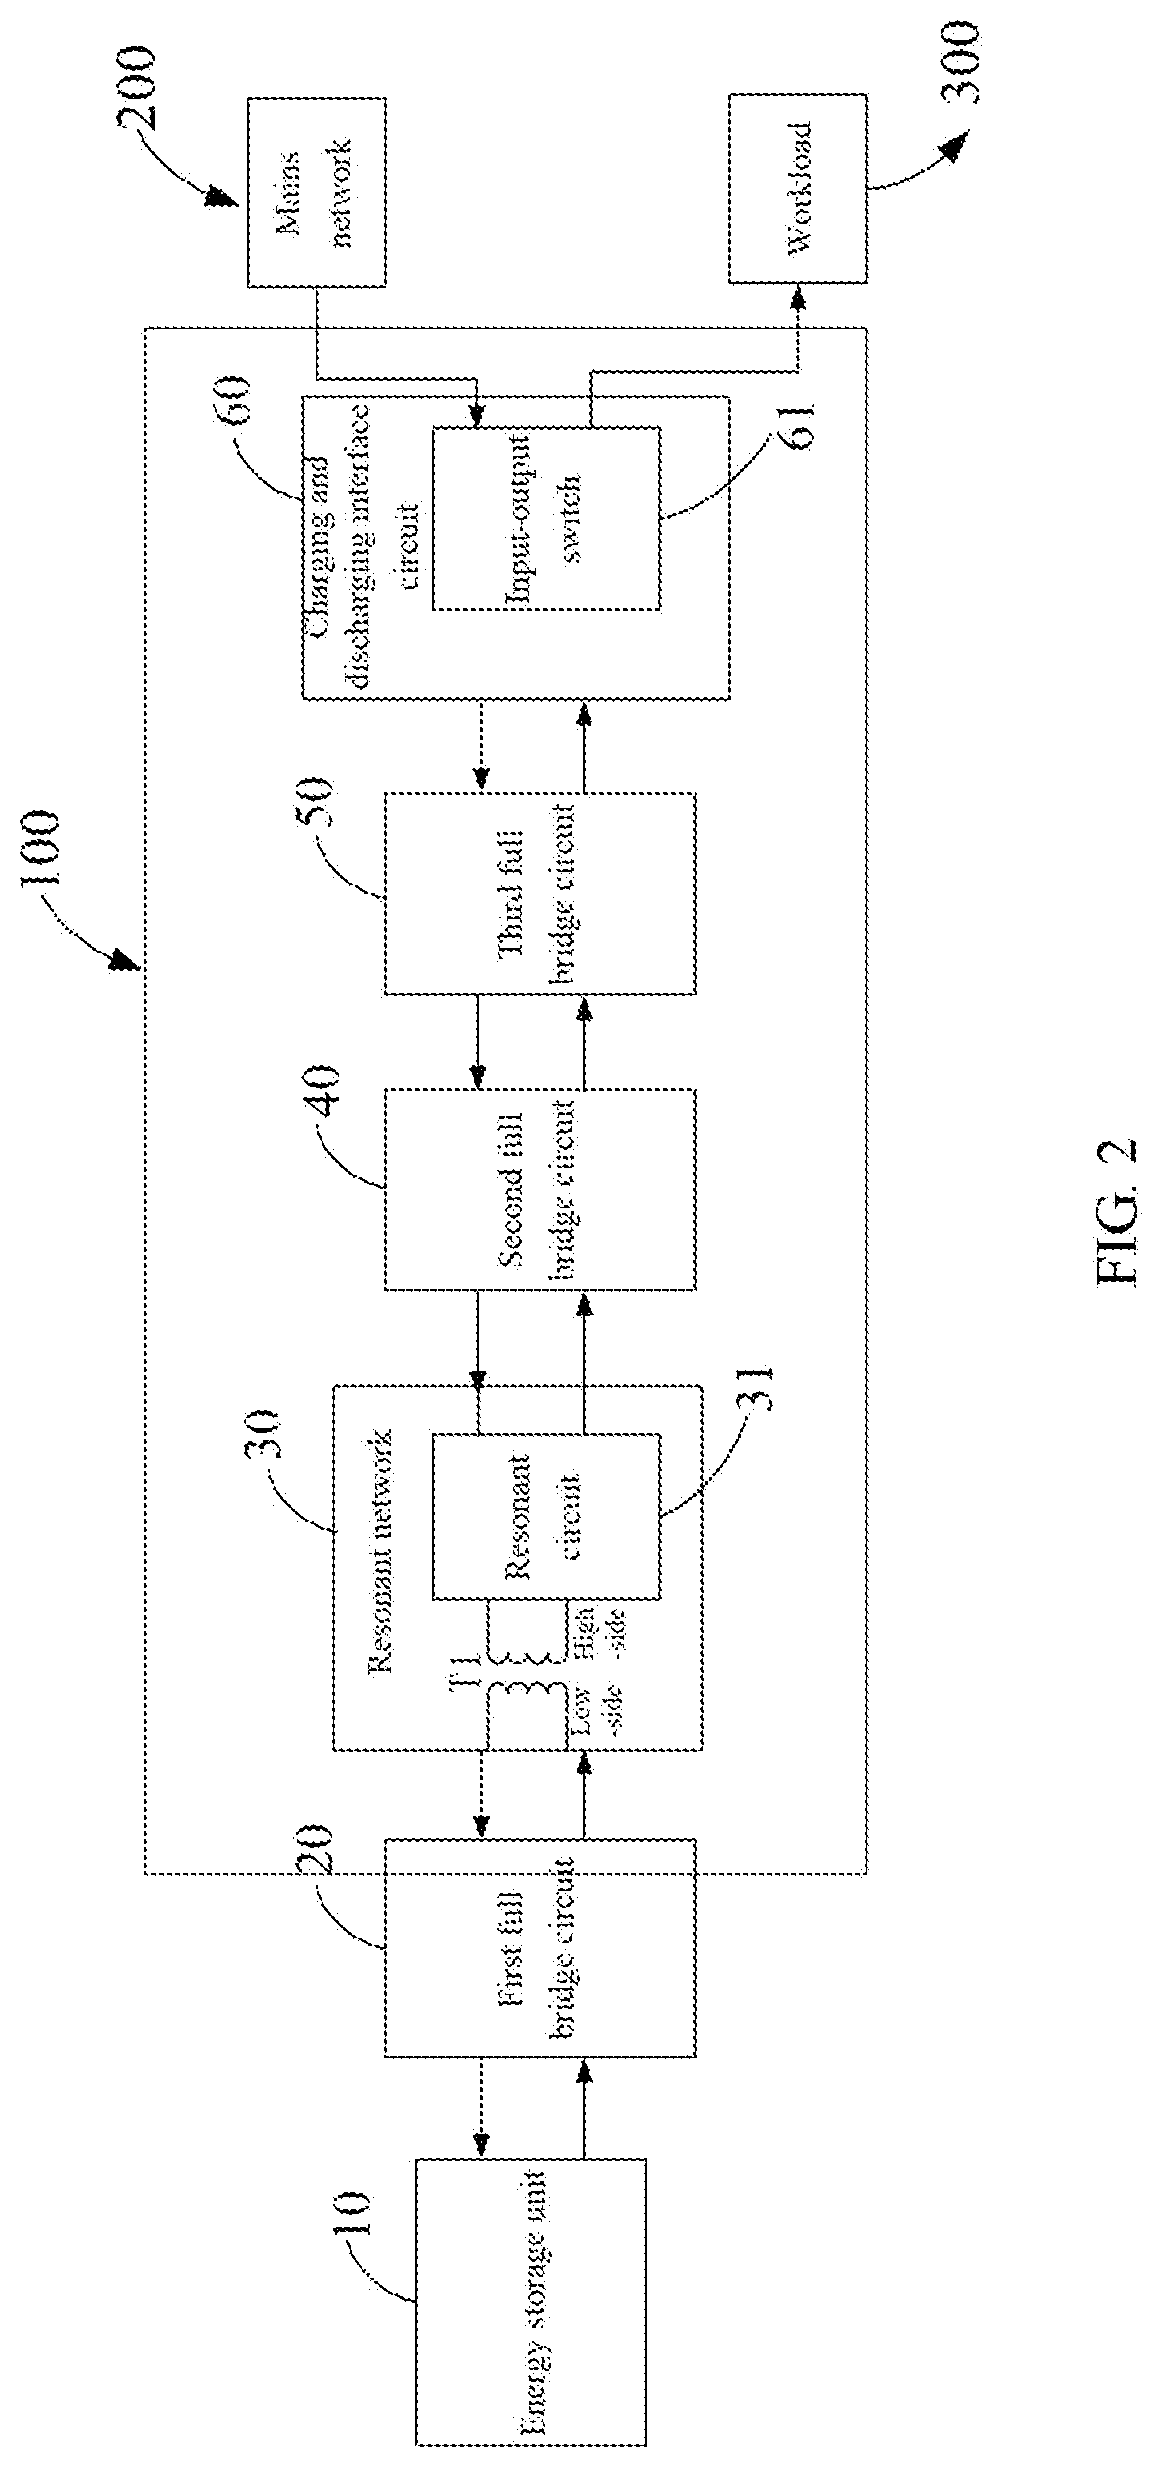 Bidirectional portable energy storage power supply without adapter